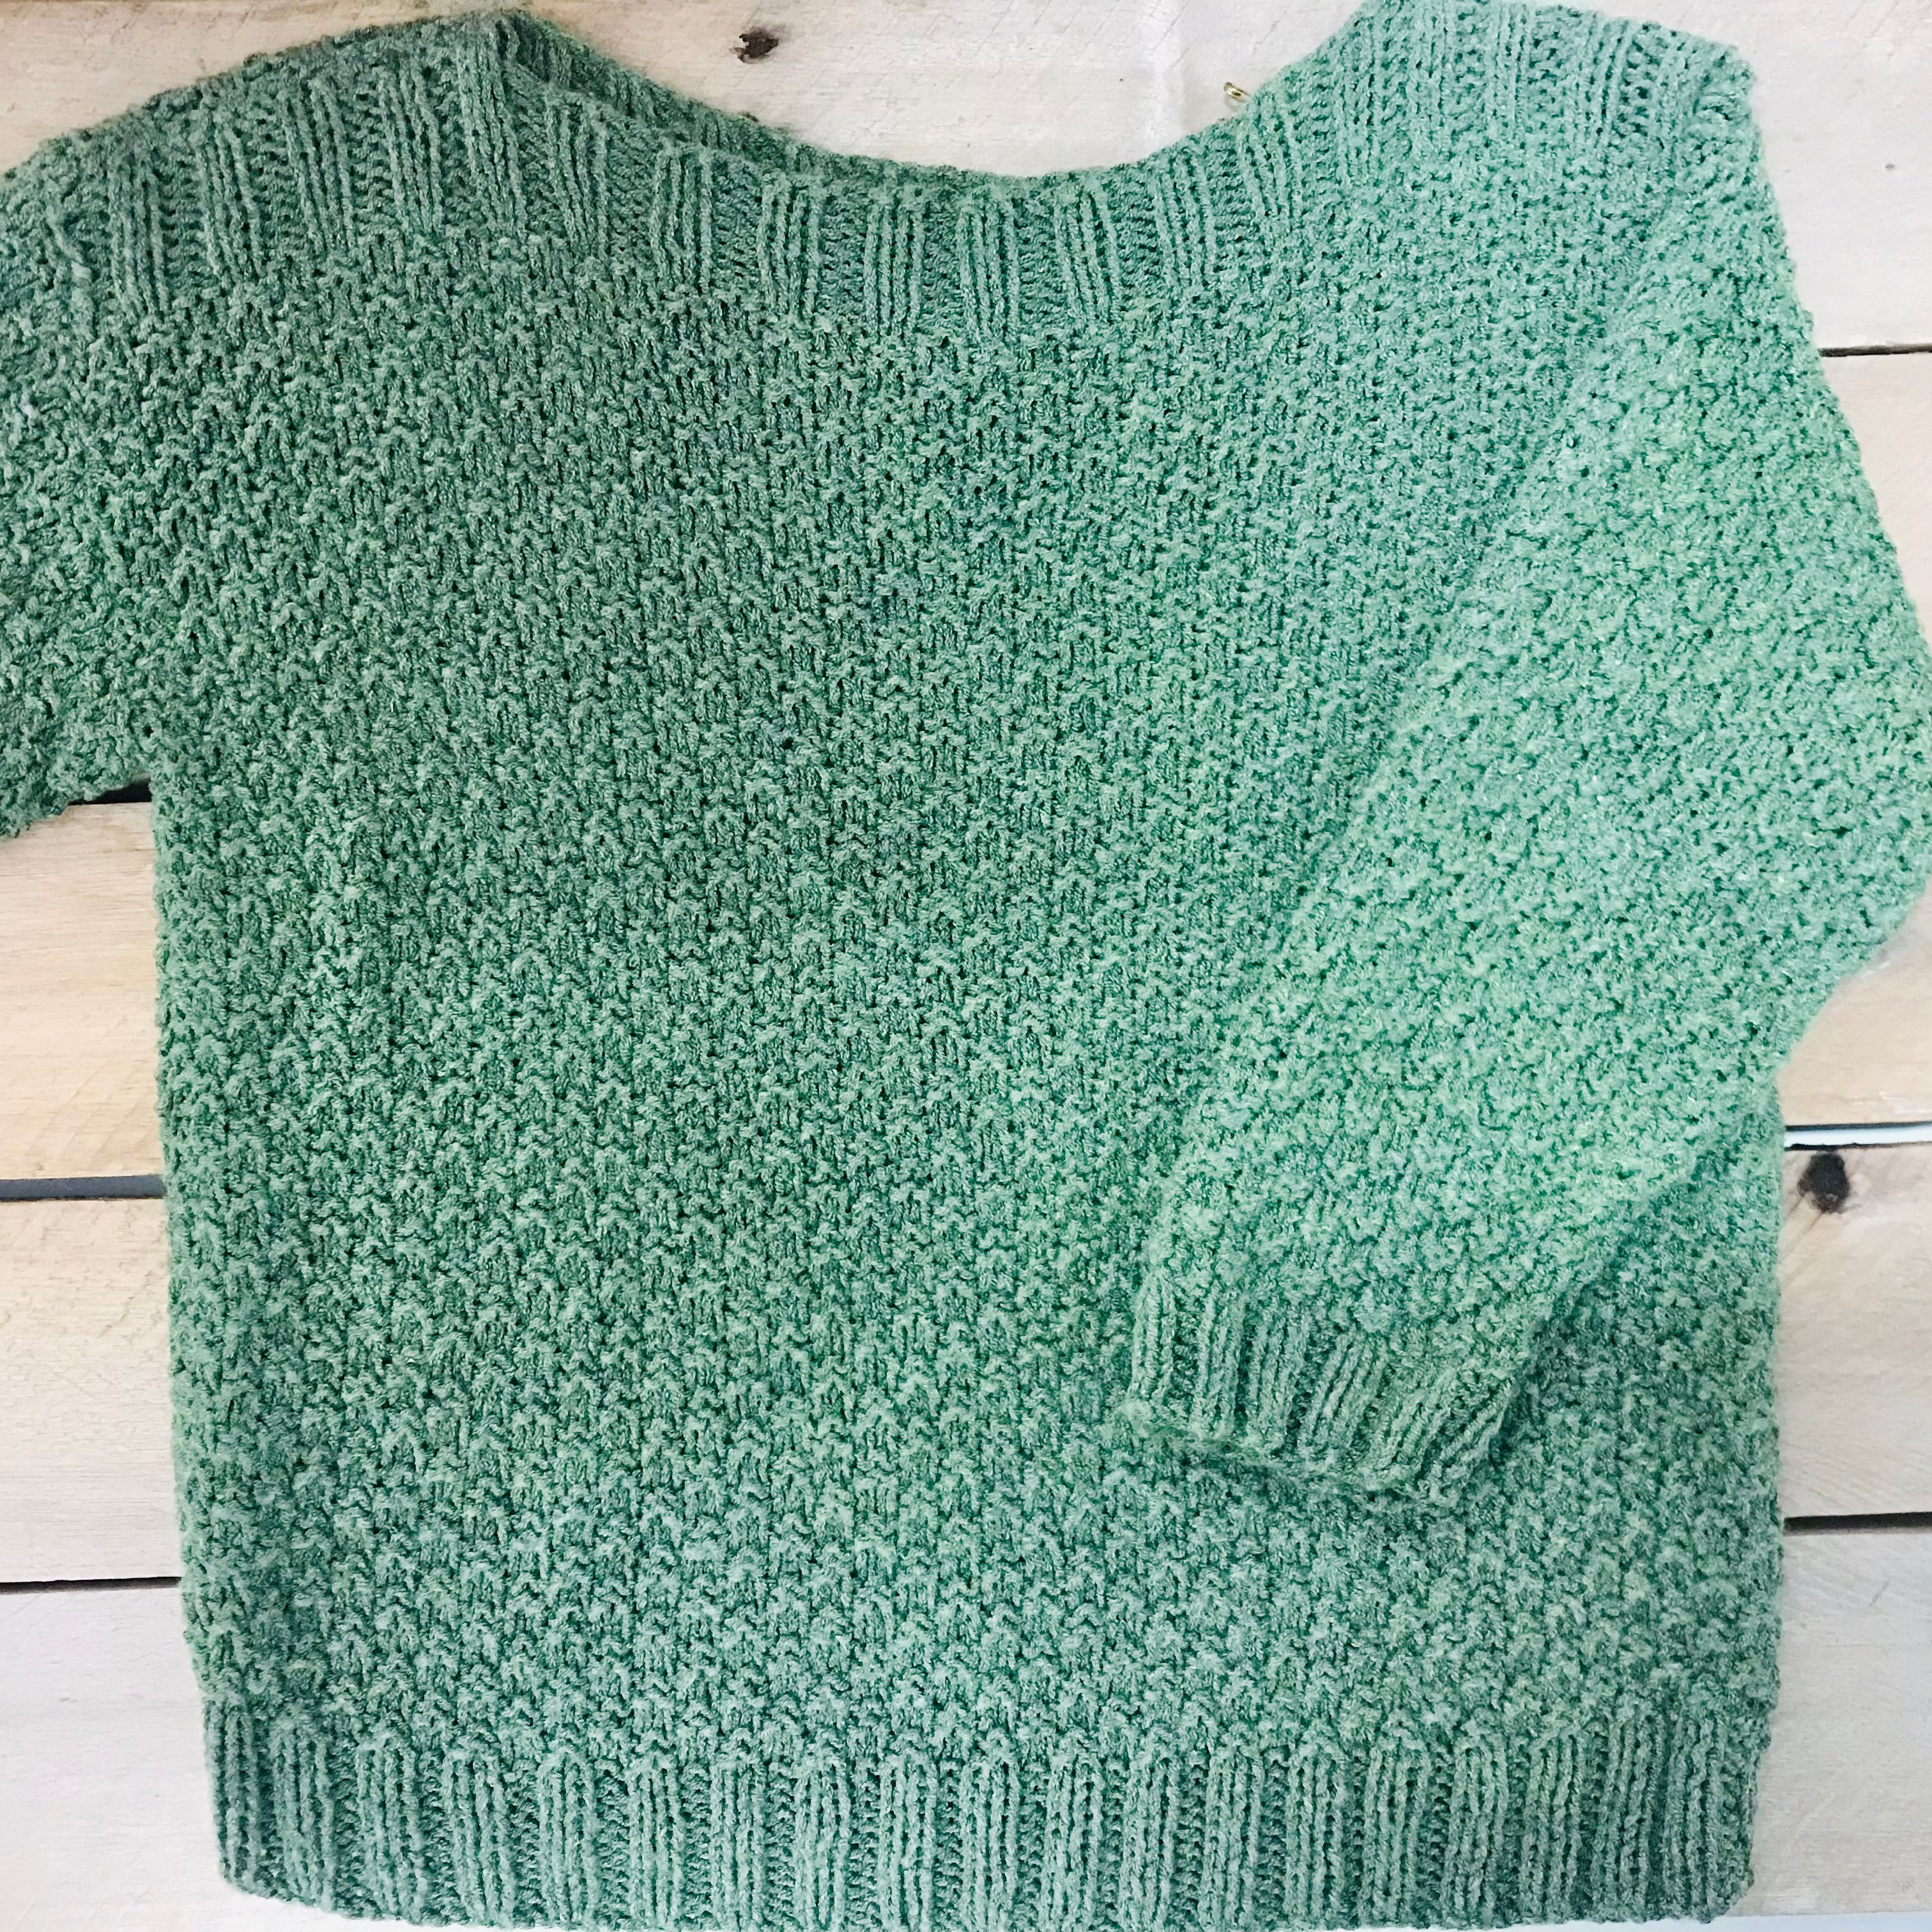 hand-knitted locally - Khaki Childrens Jumper **ON SALE**